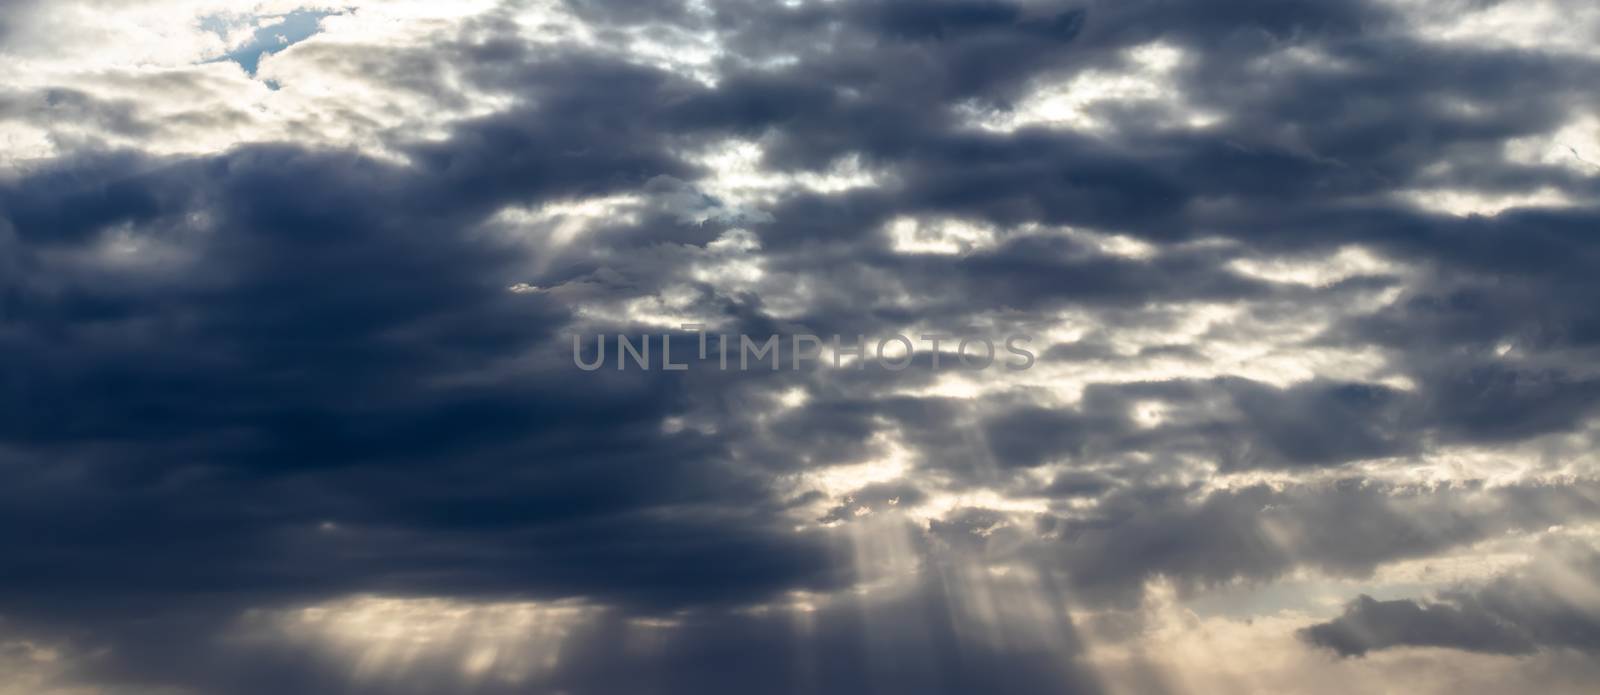 Sun rays breaking through cumulus clouds. The concept of divine light, a glimmer of hope or overcoming difficulties. Spiritual religious abstract background.